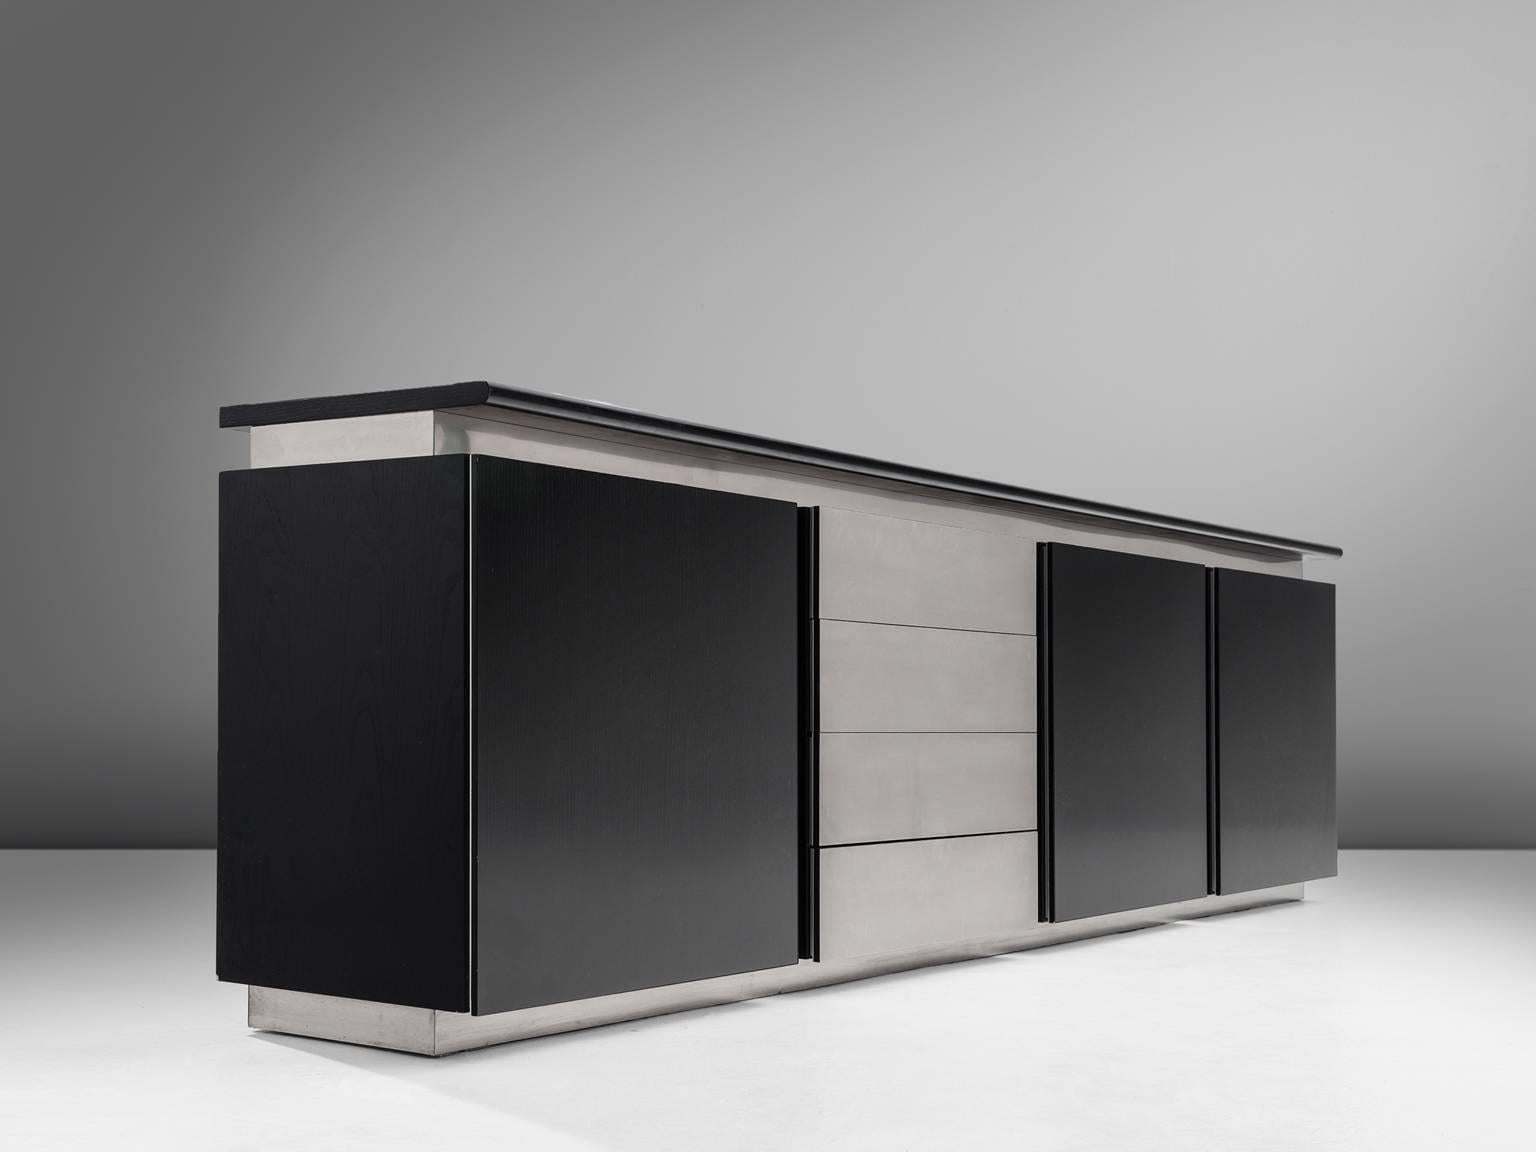 Credenza, oak and steel, 1970s, Italy.

Sleek and modern credenza in stainless steel and stained oak is designed by Ludocivo Acerbis (1939). This cabinet has both a contemporary yet monumental appearance. The design is simplistic and straight. The